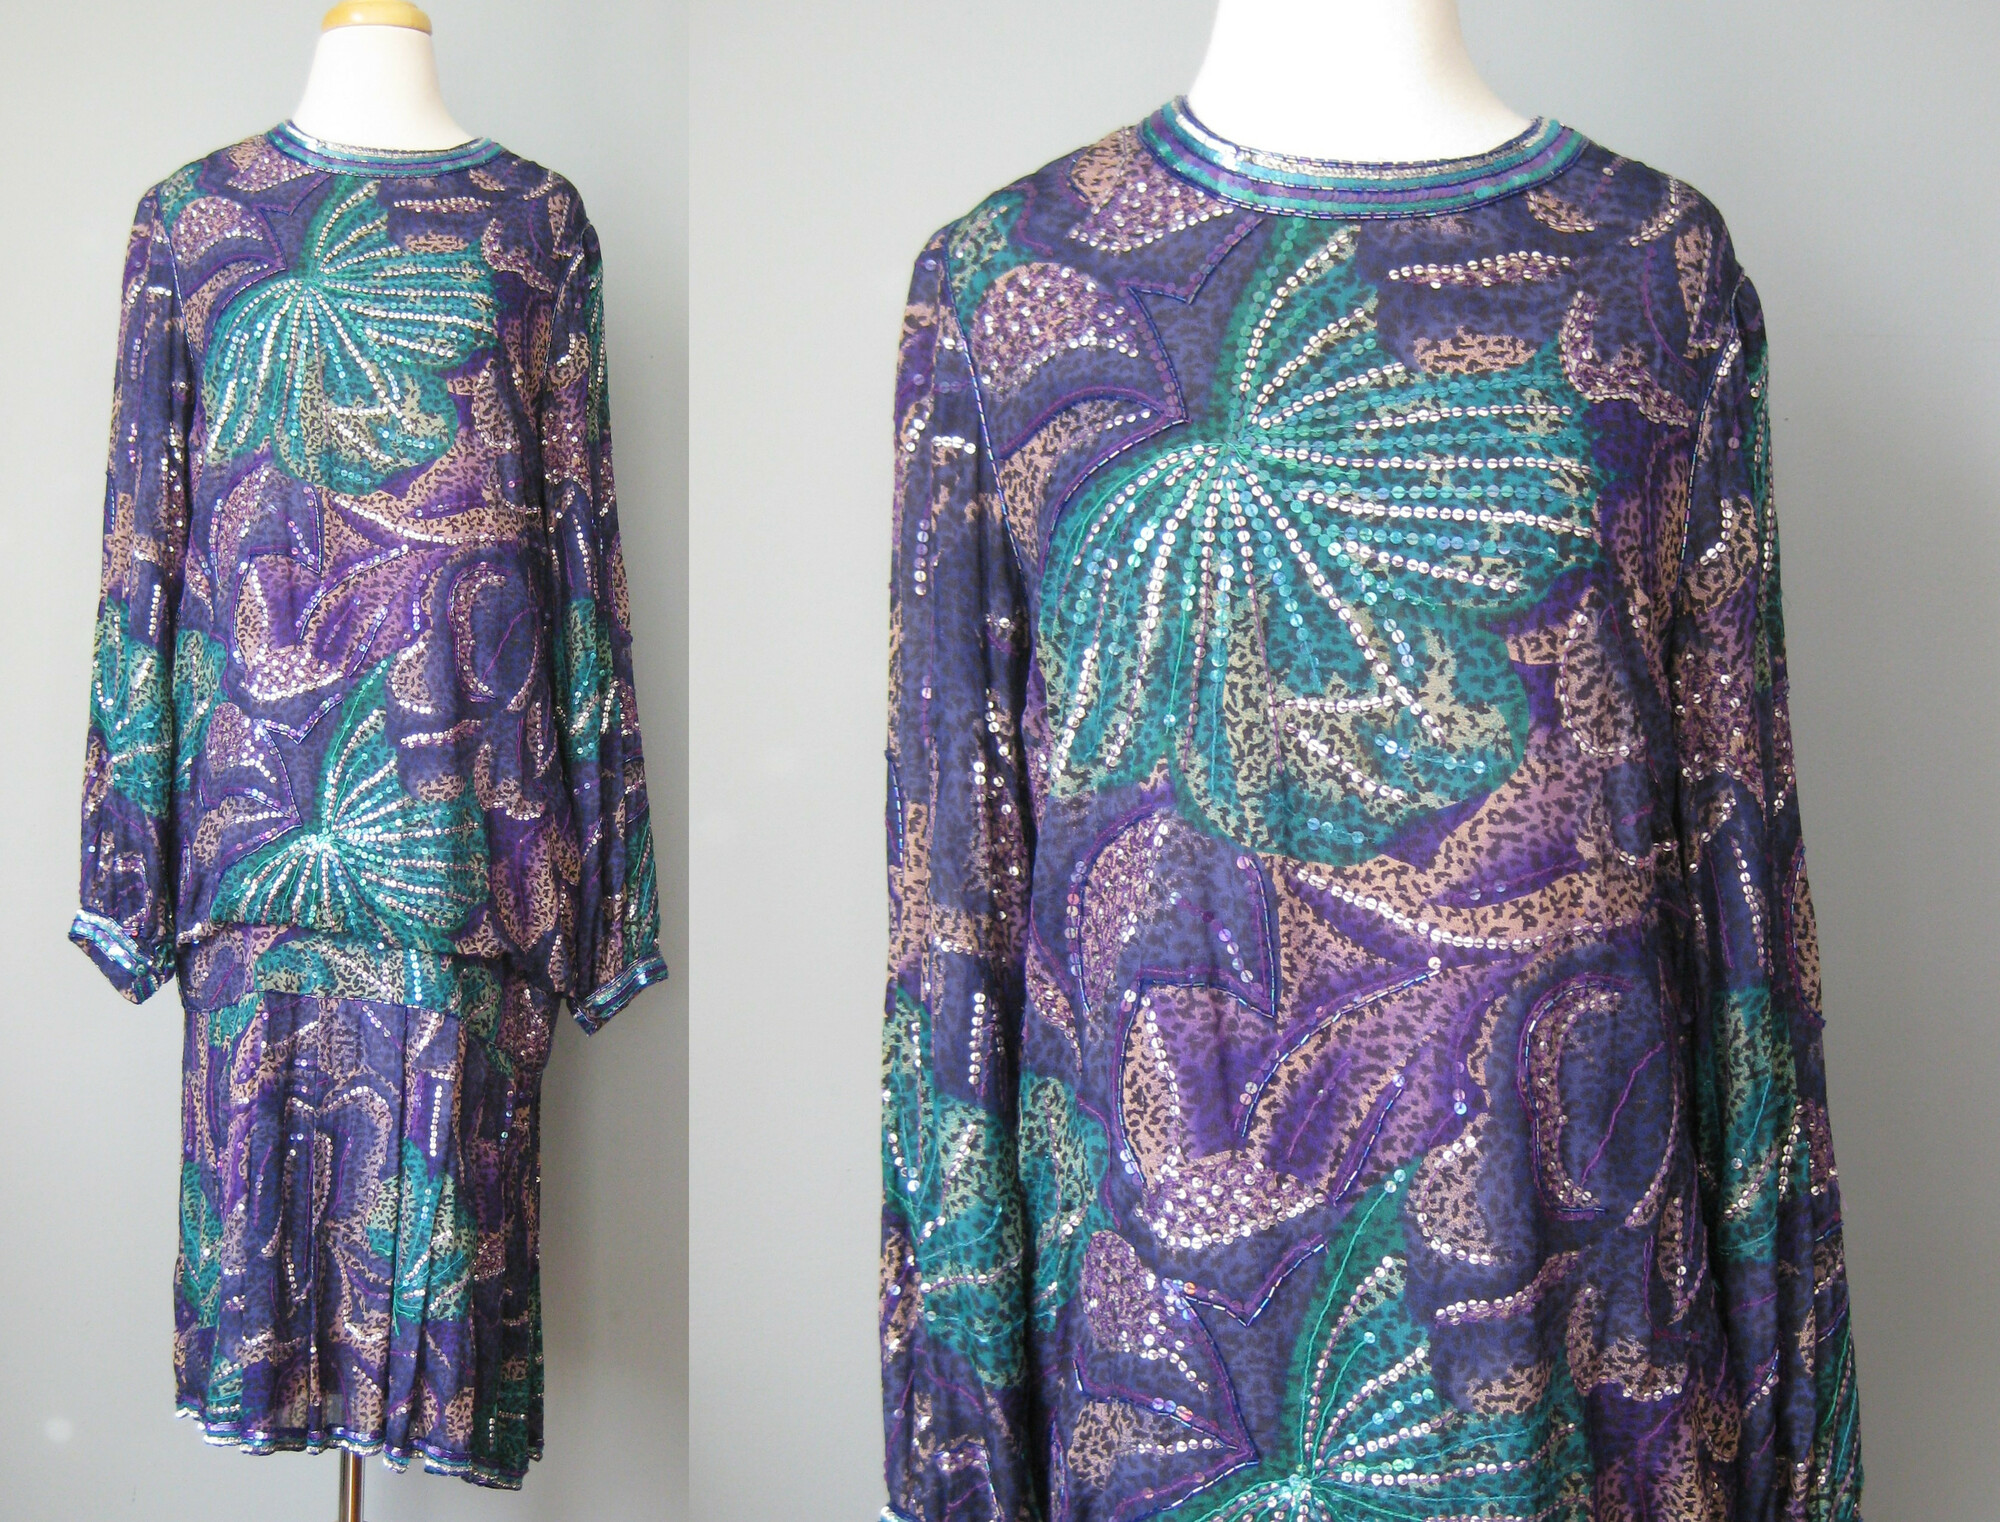 This spectacular sequined silk cocktail dress from the 1980s is perfect for festive evening occasions or a 1920s themed formal party.   The dress is silk and in peacock colors of blue green and purple.  Beaded and embroidered with an abstract fireworks designs.

The dress has a dropped blouson waist and a short pleated skirt
Long sleeves and center back zipper.

100% silk by Judith Ann creations. Made in India

the bad news is that the lining at one shoulder is damaged and weak overall.  It could use a new lining.
It can be worn as is if you are super careful putting it on and taking it off.  I've priced it accordingly!

Marked size M but better for a small.
Here are the flat measurements, please double where appropriate:
Shoulder to shoulder: 15.5
Armpit to Armpit: 19.25
Waist: 20
Hips: 19
Length from back of neck to hem: 42


Thank you for looking.
#46129